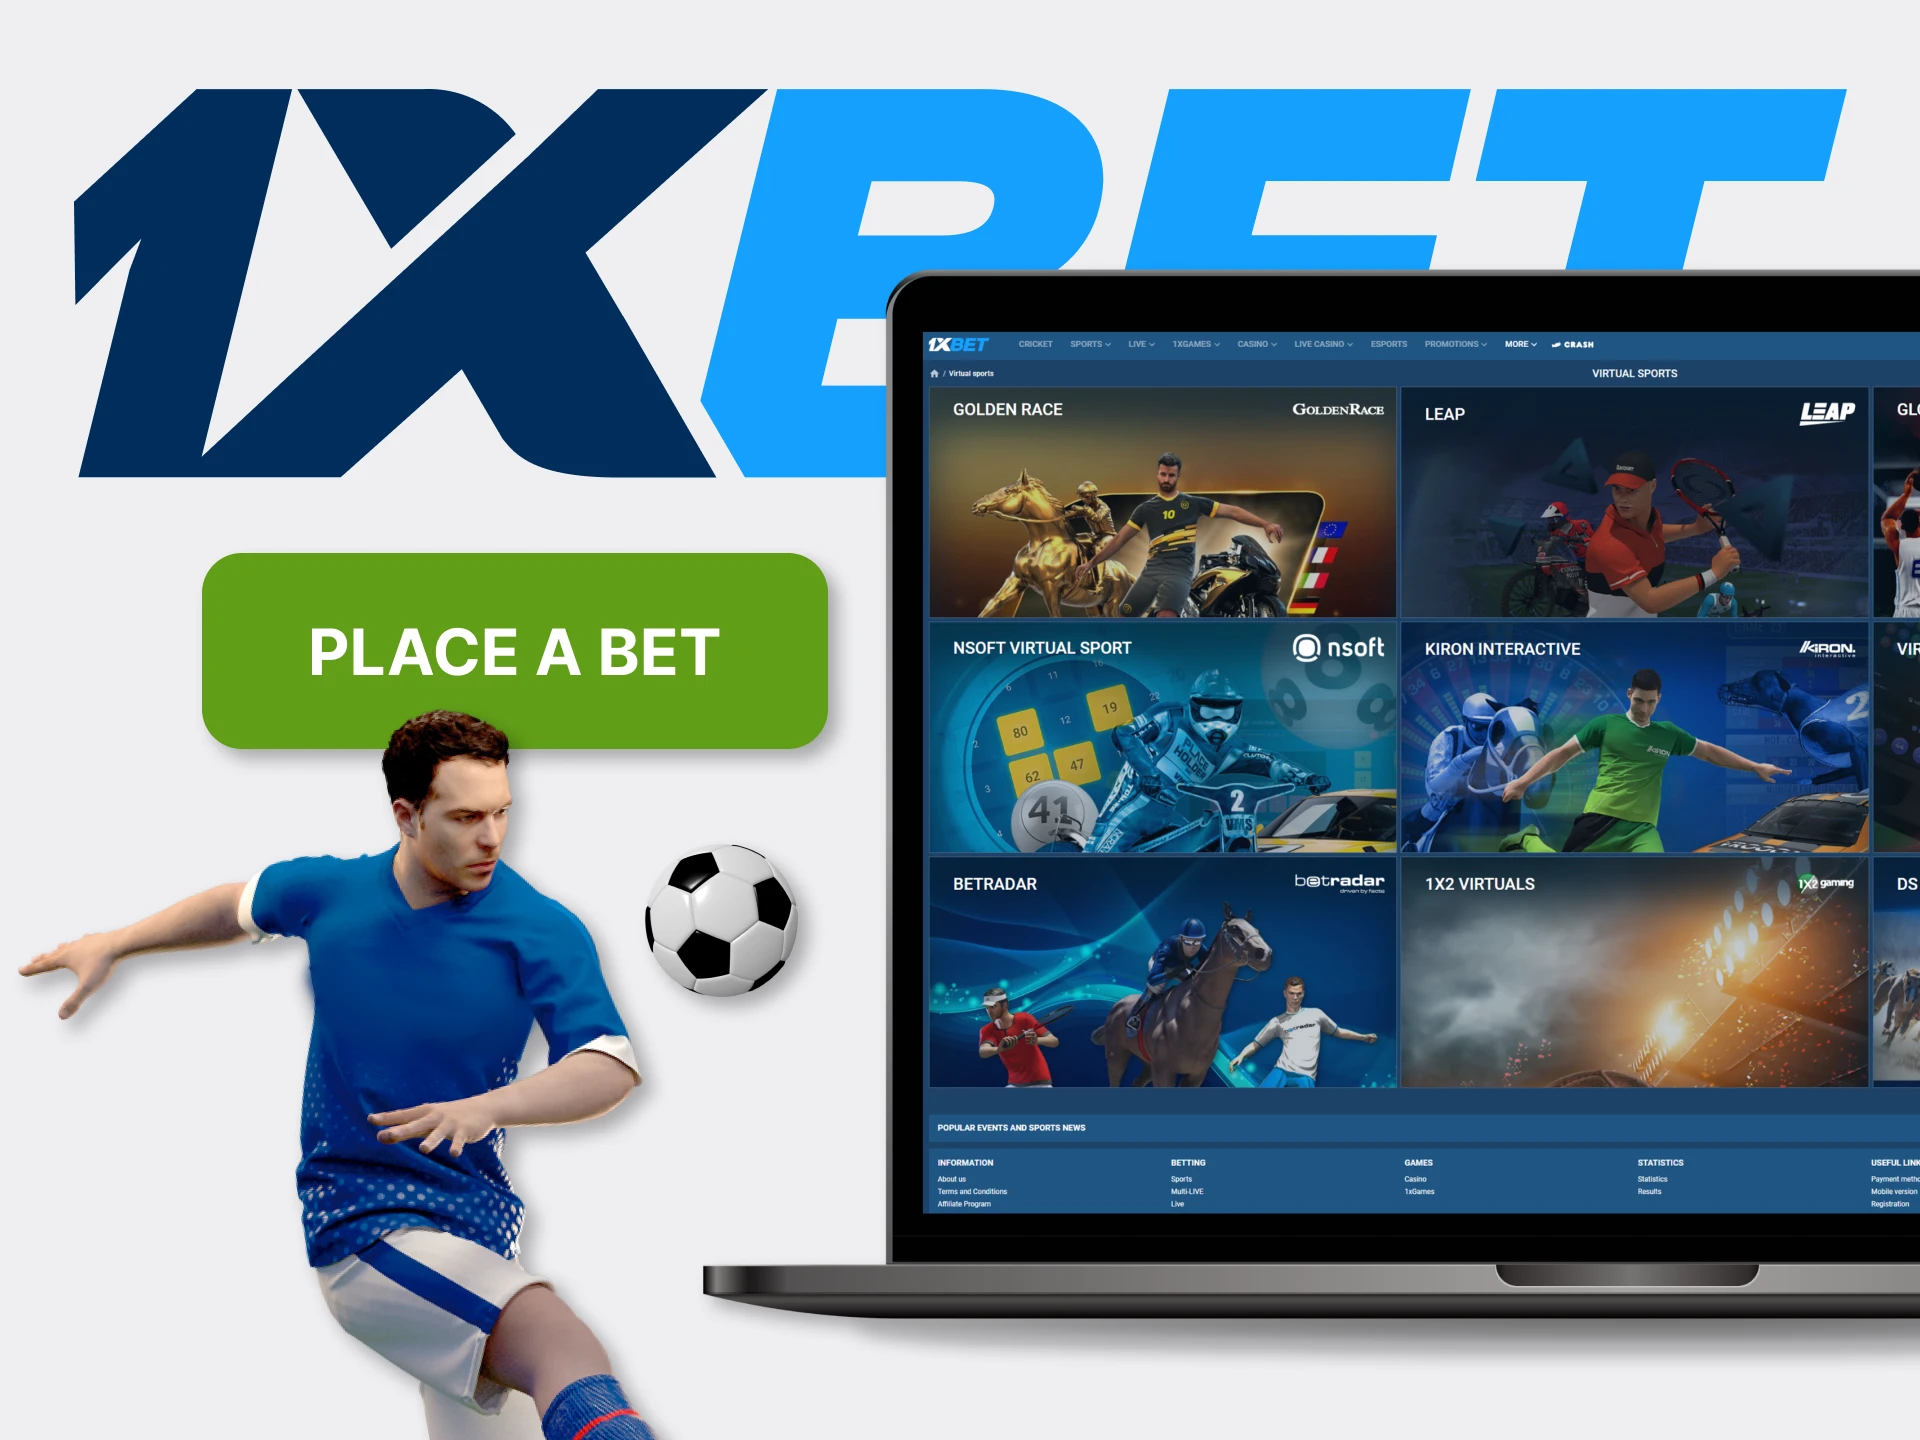 Learn how easy it is to bet on virtual sports with 1xBet from this instruction.